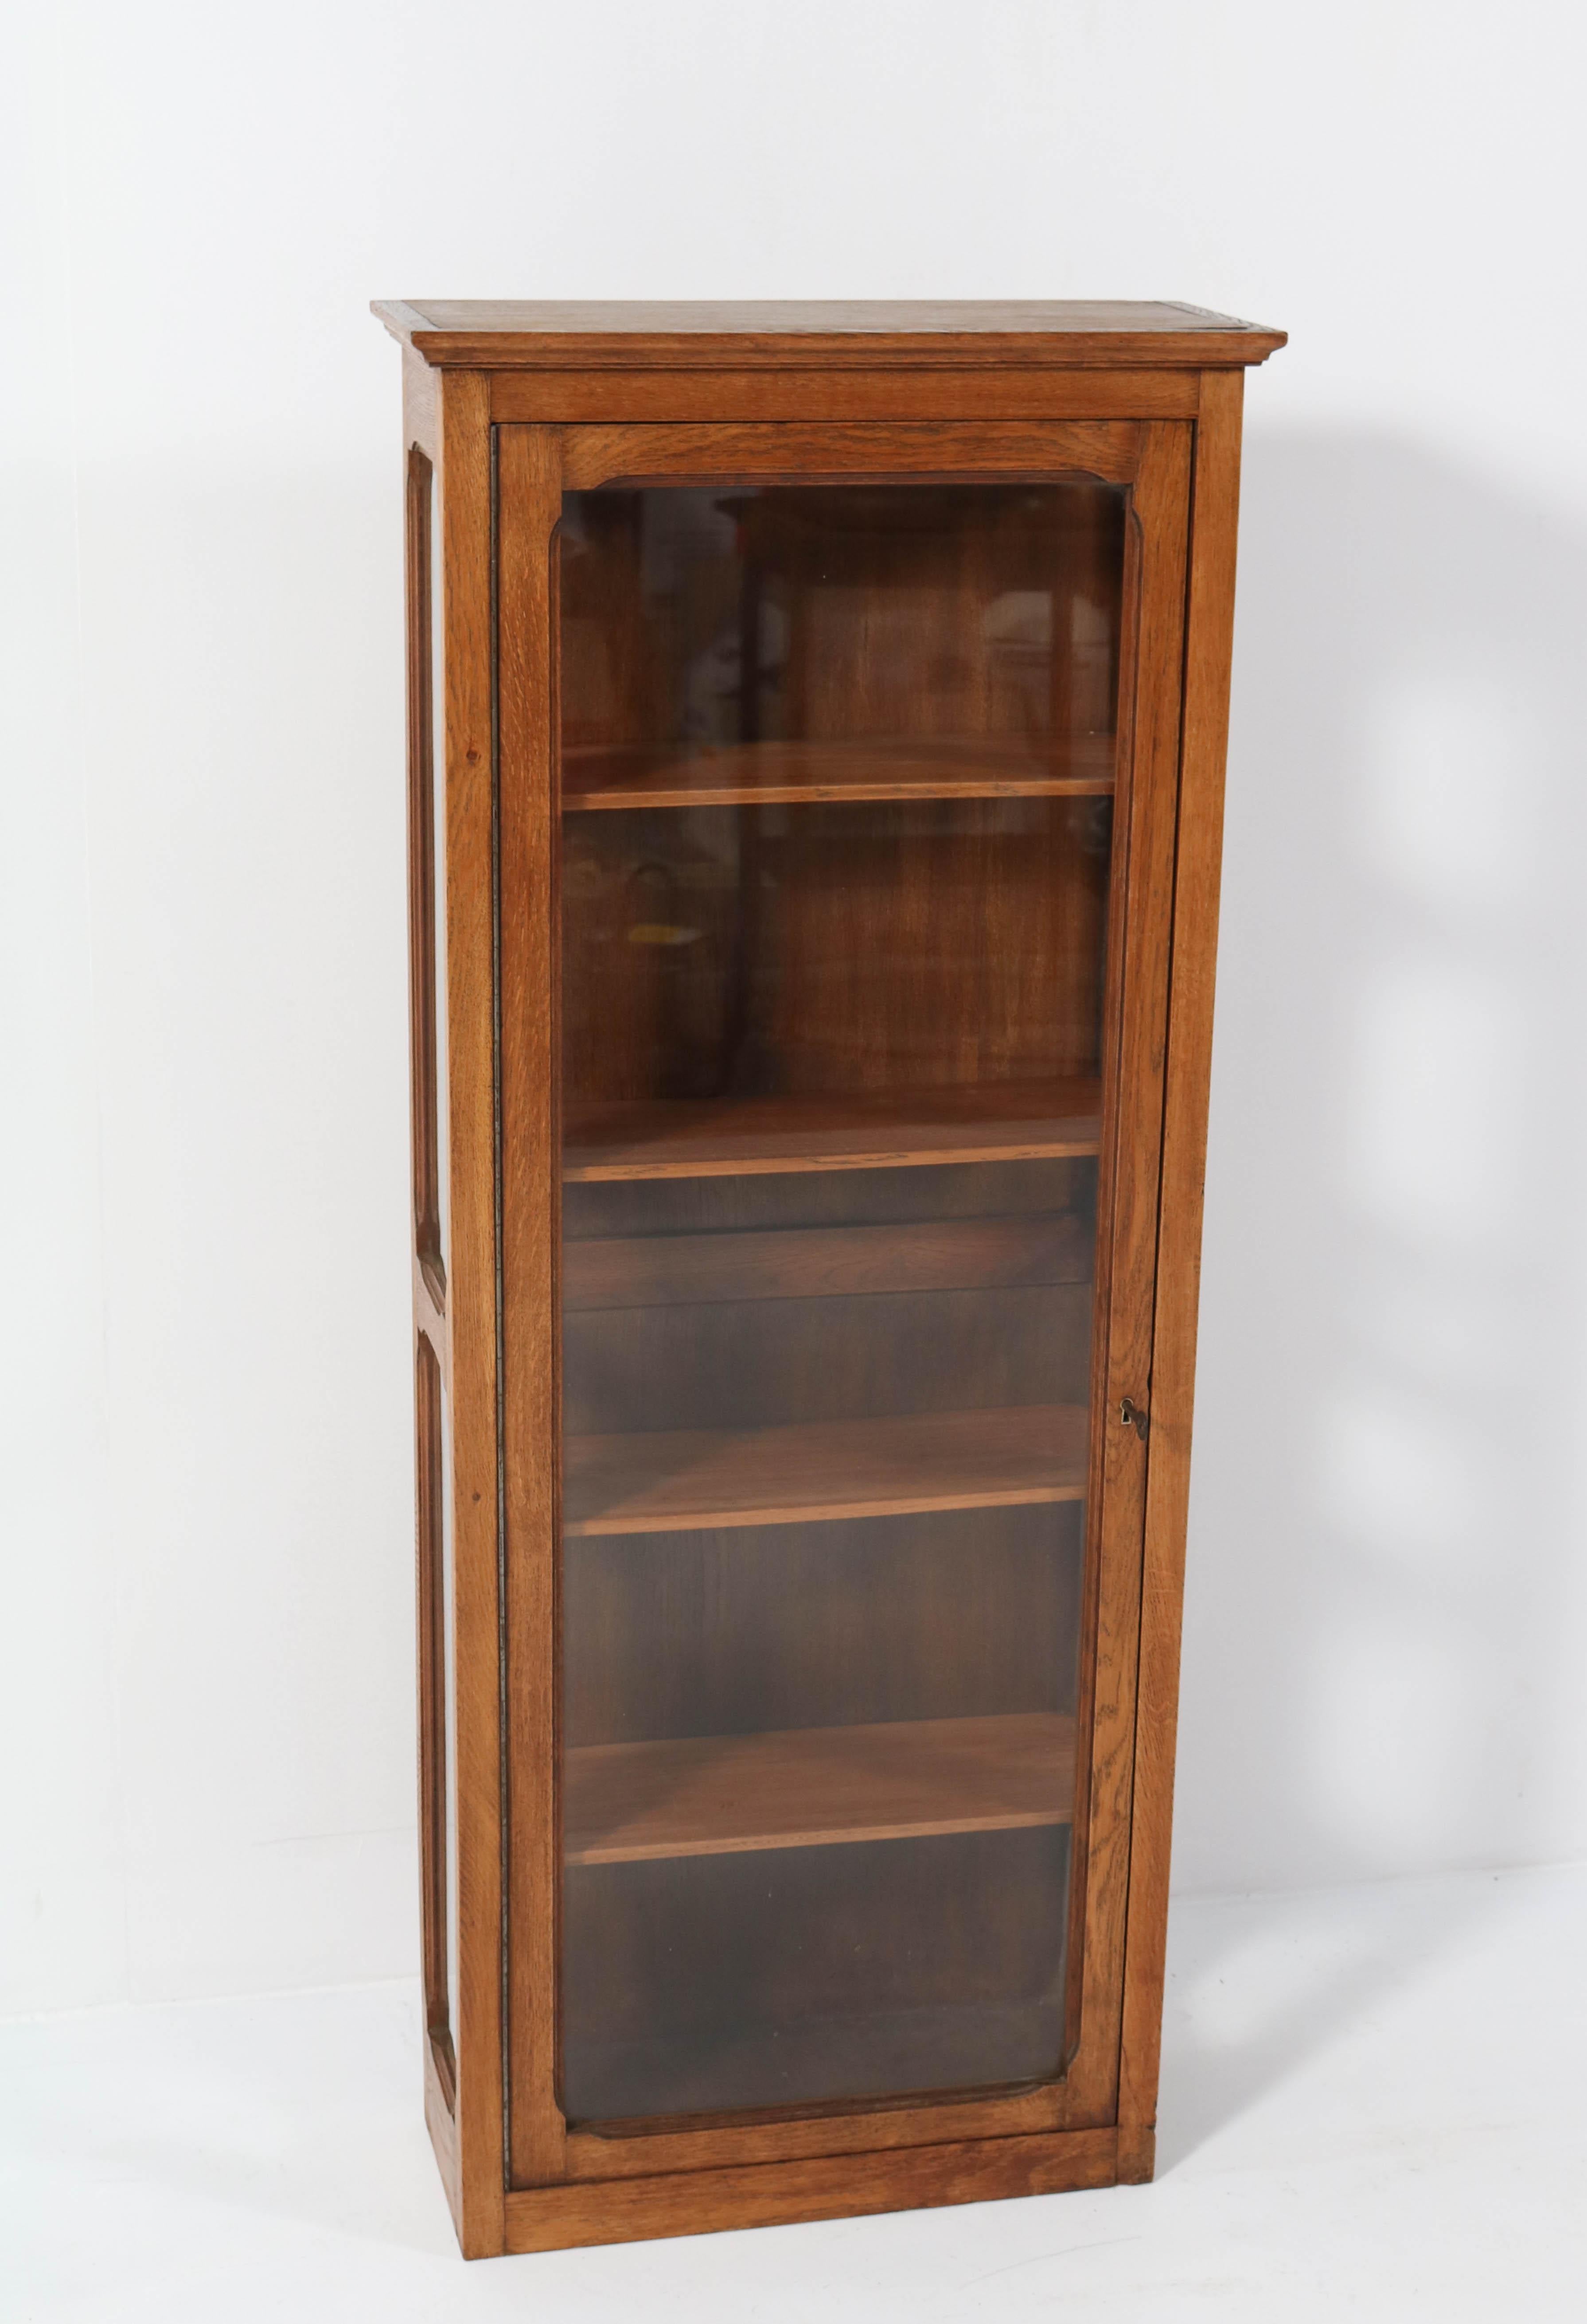 Stunning Art Nouveau wall display cabinet.
Striking French design from the 1900s.
Solid oak with four original wooden shelves.
In very good condition with minor wear consistent with age and use,
preserving a beautiful patina.